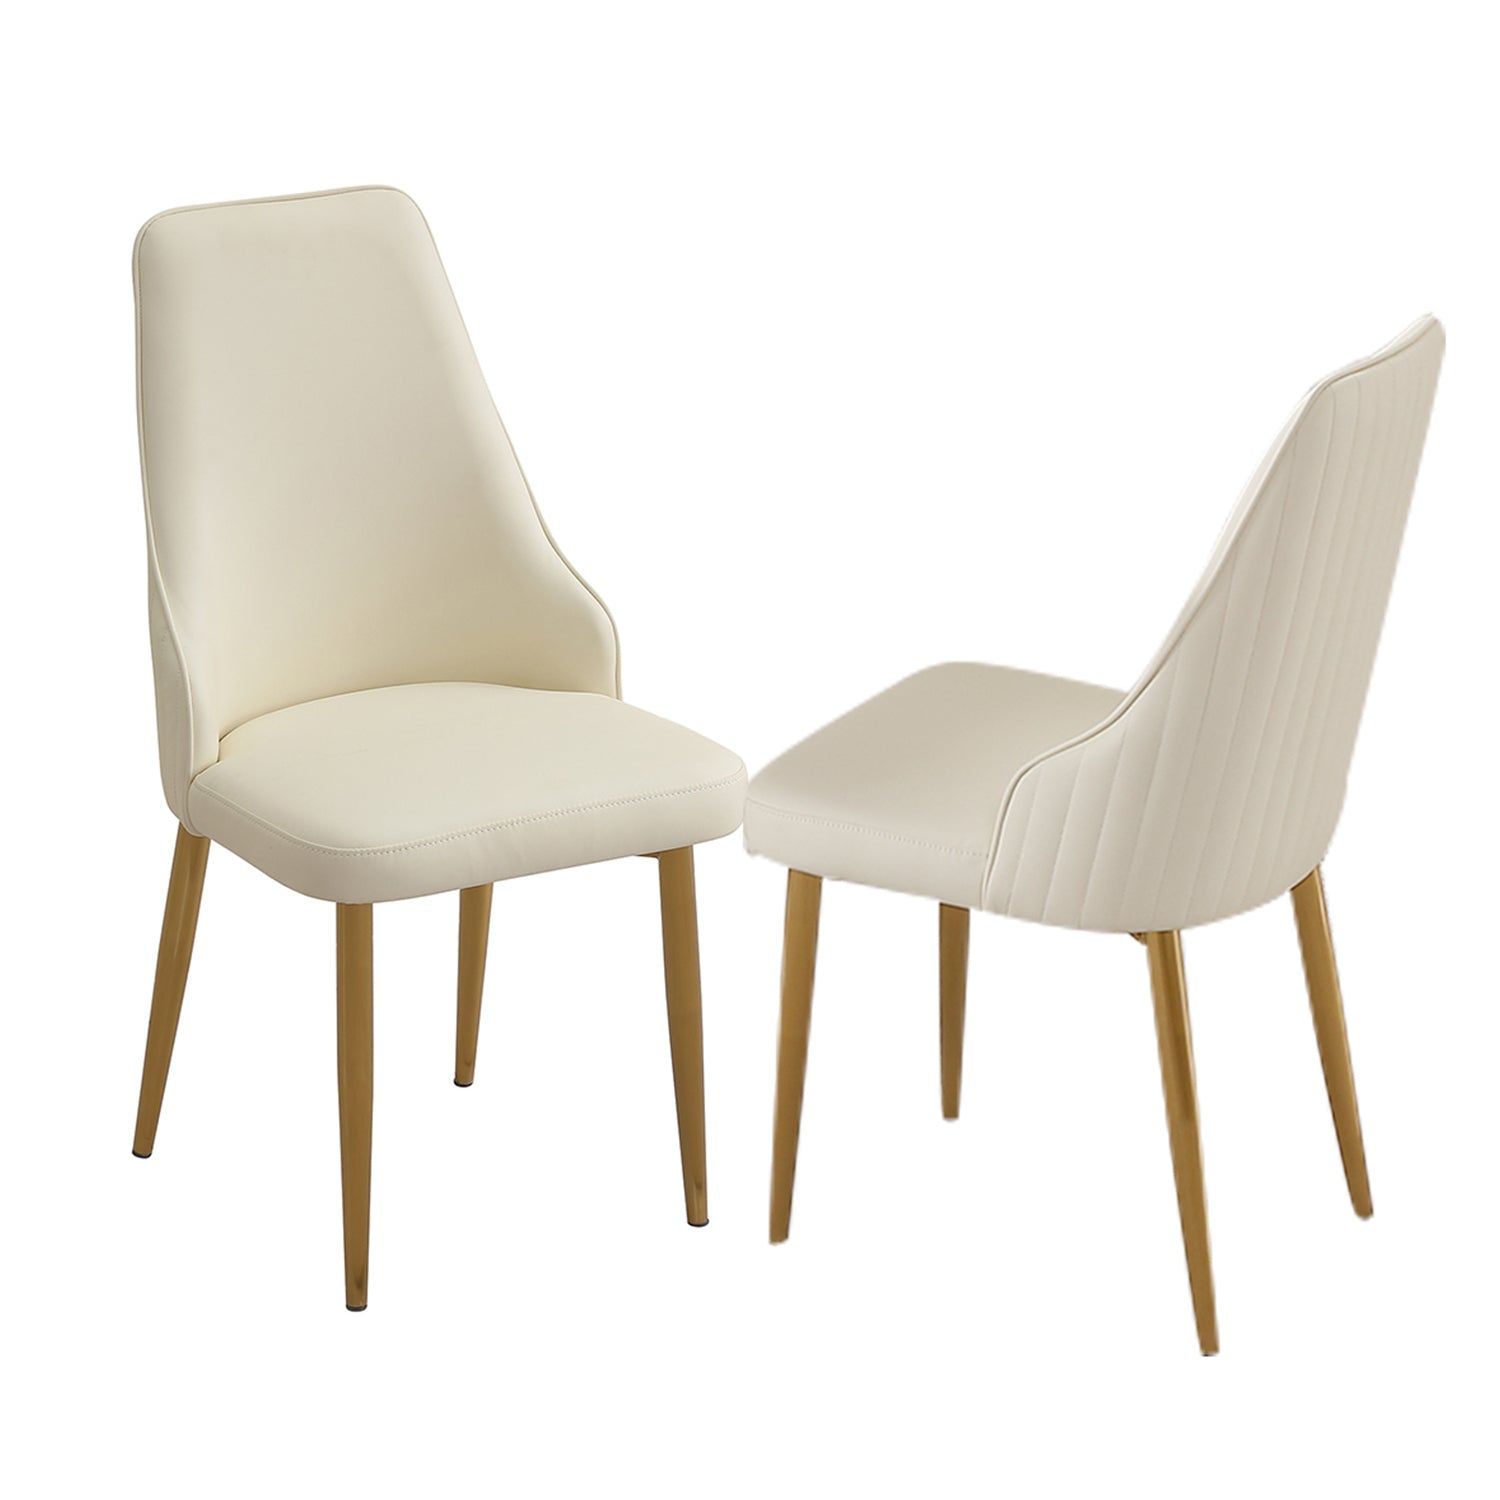 ZNTS Dining Chair with PU Leather White strong metal legs W50960341